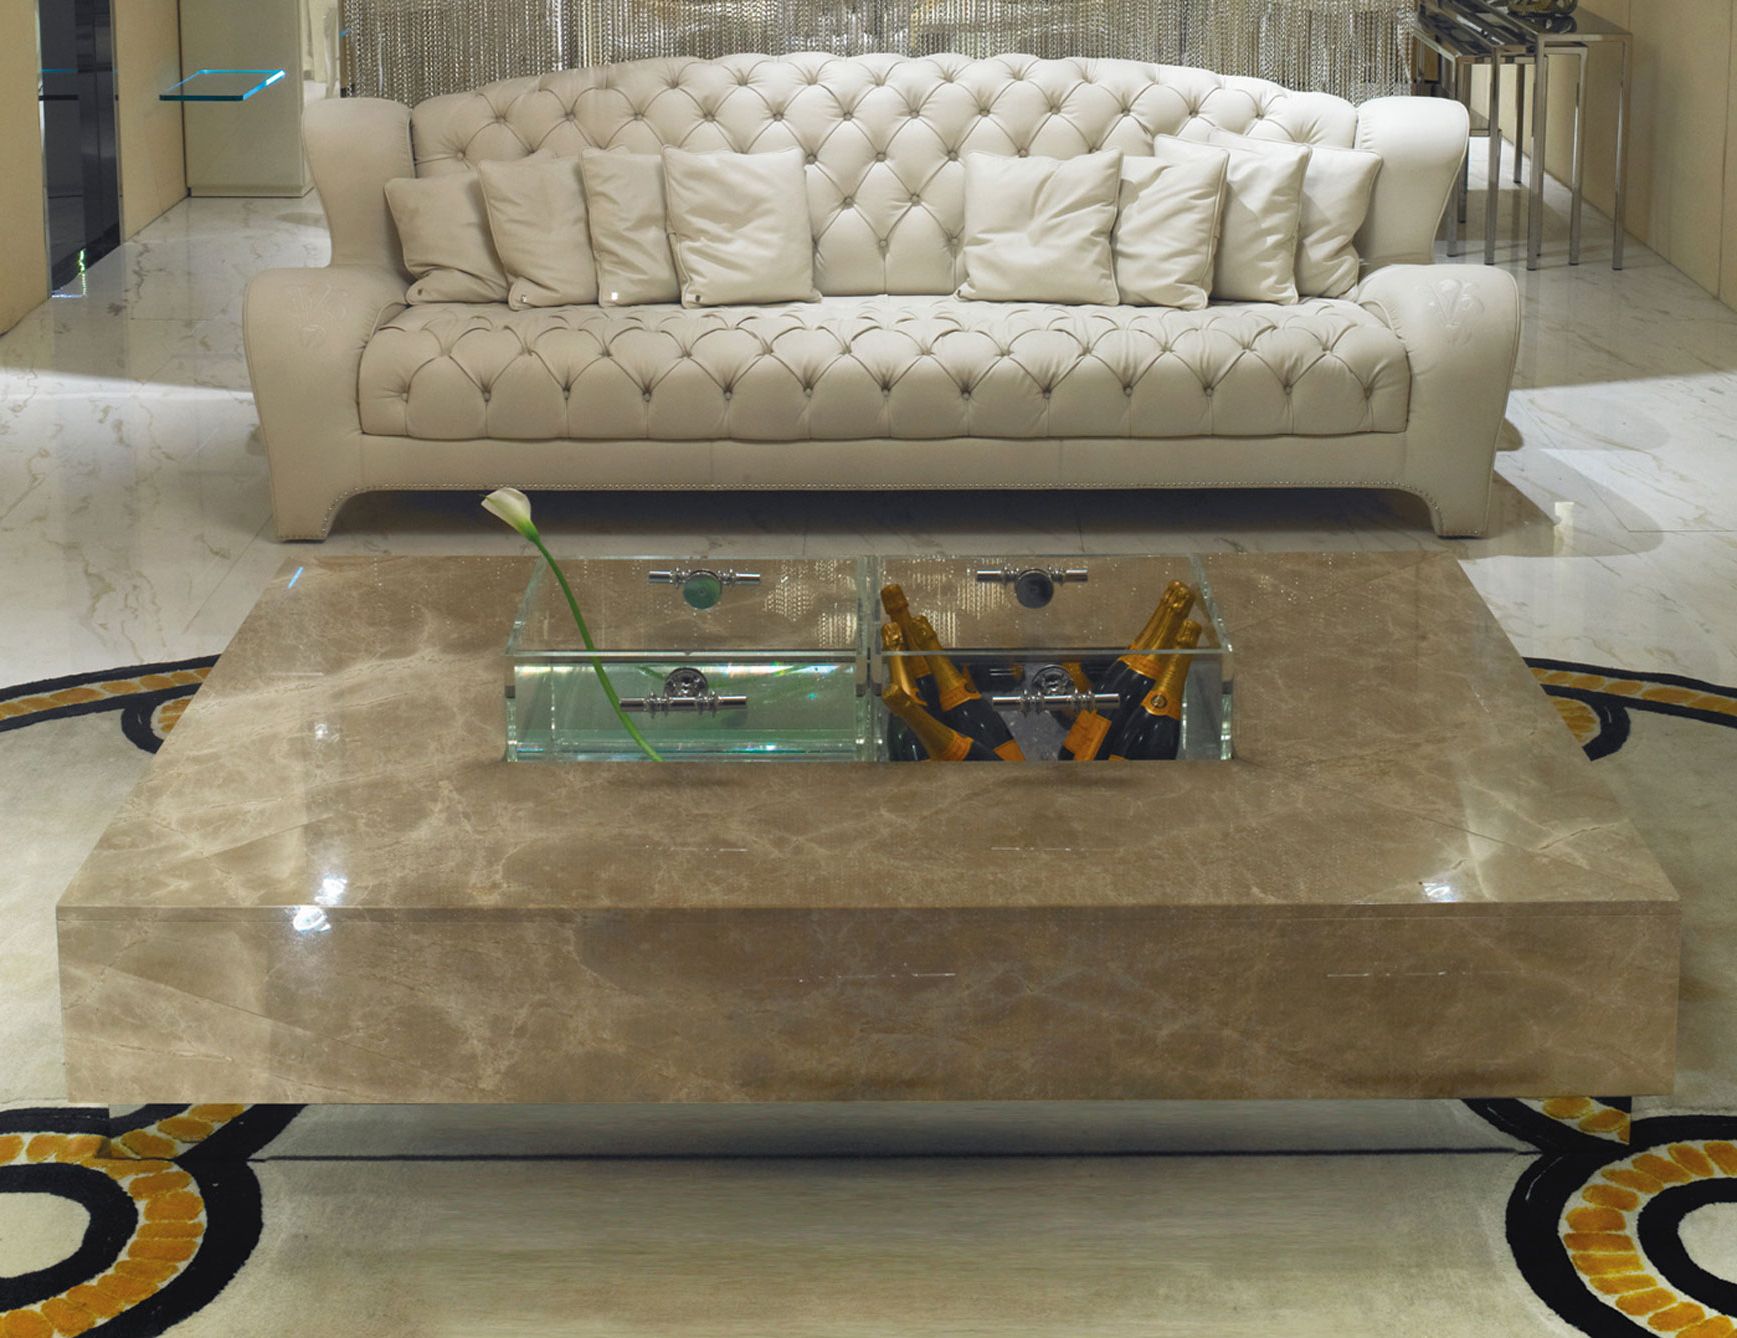 Widely Used Cream And Gold Coffee Tables Pertaining To Nella Vetrina Visionnaire Ipe Cavalli Ruis Italian Coffee (View 13 of 20)